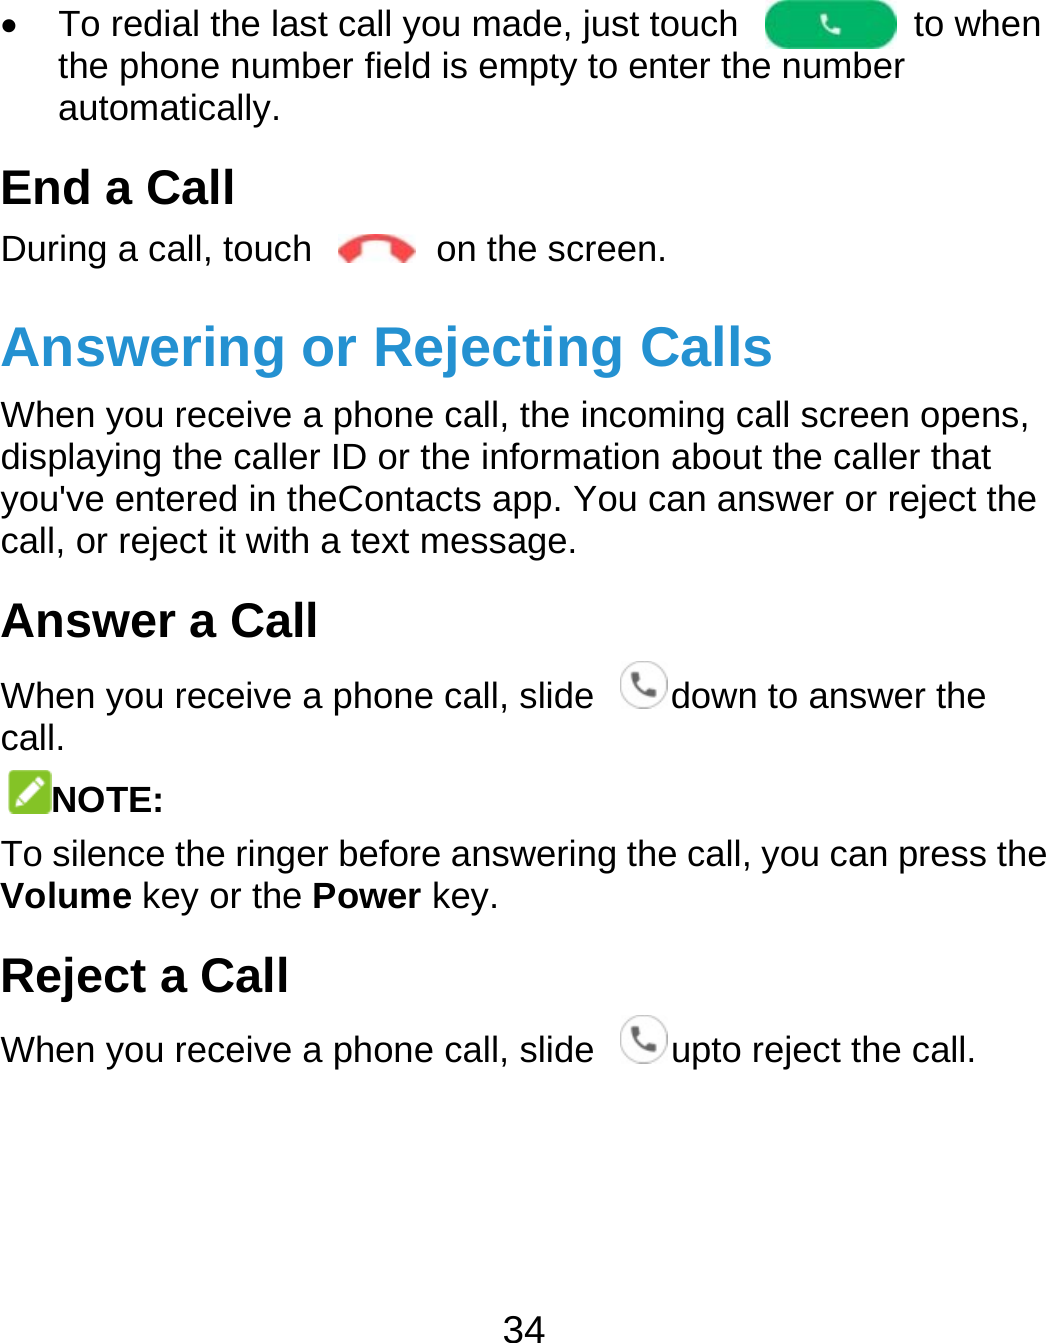  34   To redial the last call you made, just touch    to when the phone number field is empty to enter the number automatically. End a Call During a call, touch    on the screen. Answering or Rejecting Calls When you receive a phone call, the incoming call screen opens, displaying the caller ID or the information about the caller that you&apos;ve entered in theContacts app. You can answer or reject the call, or reject it with a text message. Answer a Call When you receive a phone call, slide  down to answer the call. NOTE: To silence the ringer before answering the call, you can press the Volume key or the Power key. Reject a Call When you receive a phone call, slide  upto reject the call.  